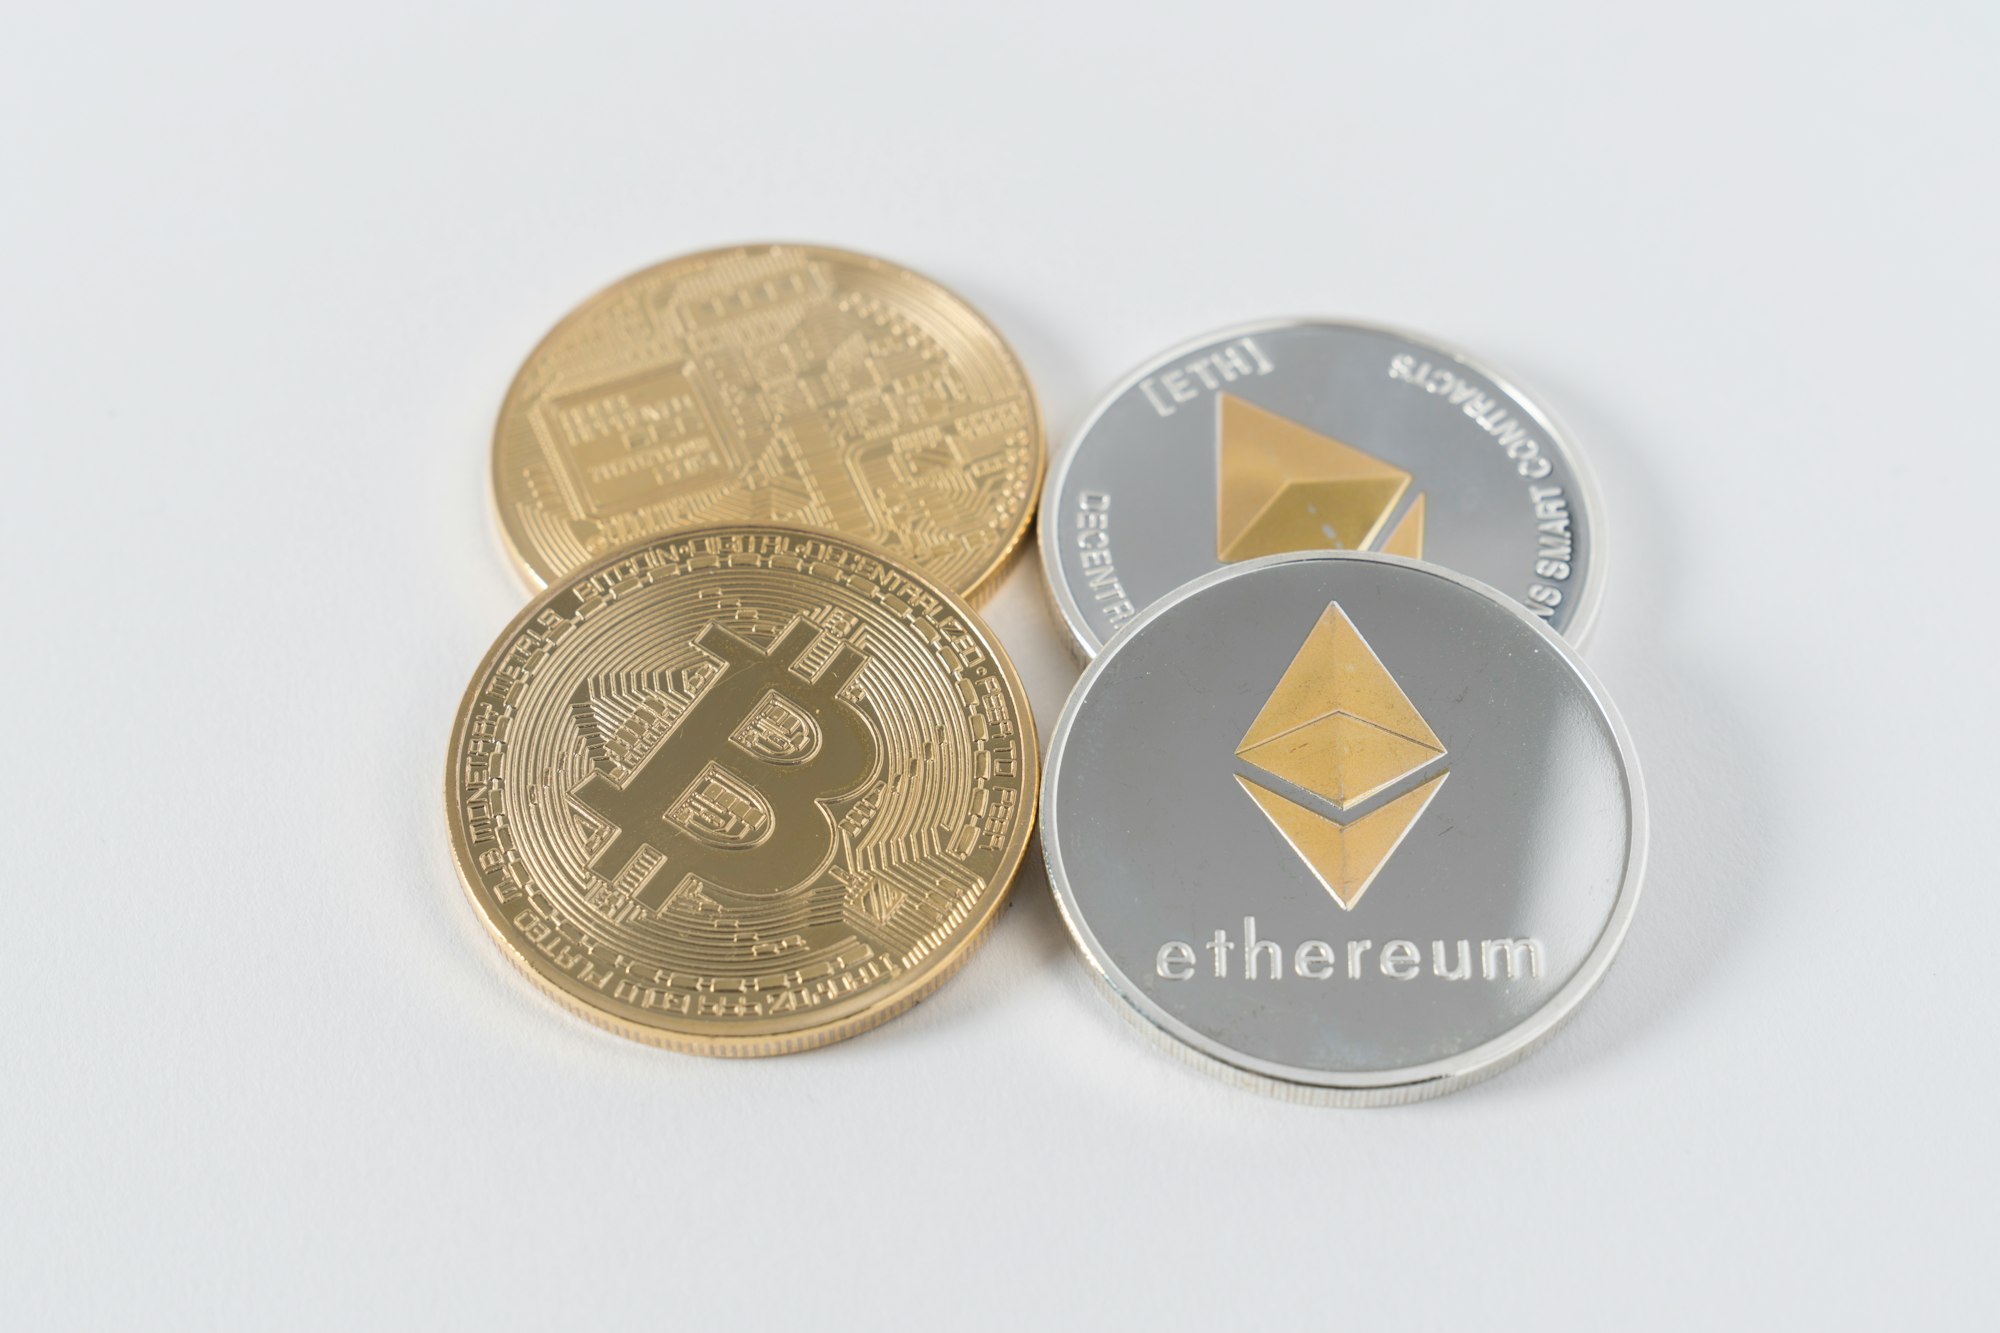 How to tell when Ethereum has bottomed